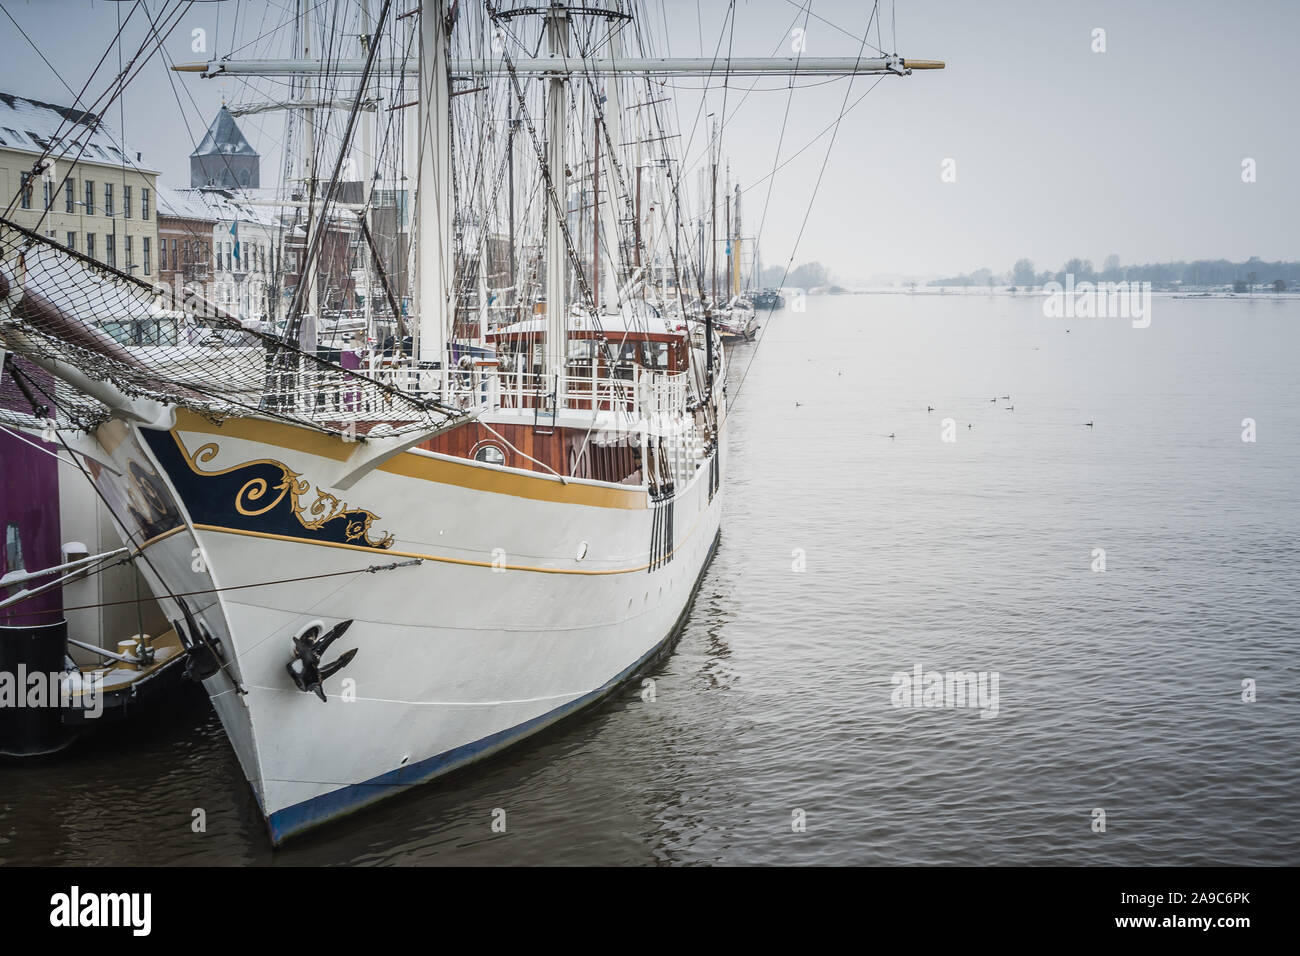 The tallship Stedemaeght in the IJssel rriver during a cold winter morning in Kampen, Netherlands Stock Photo